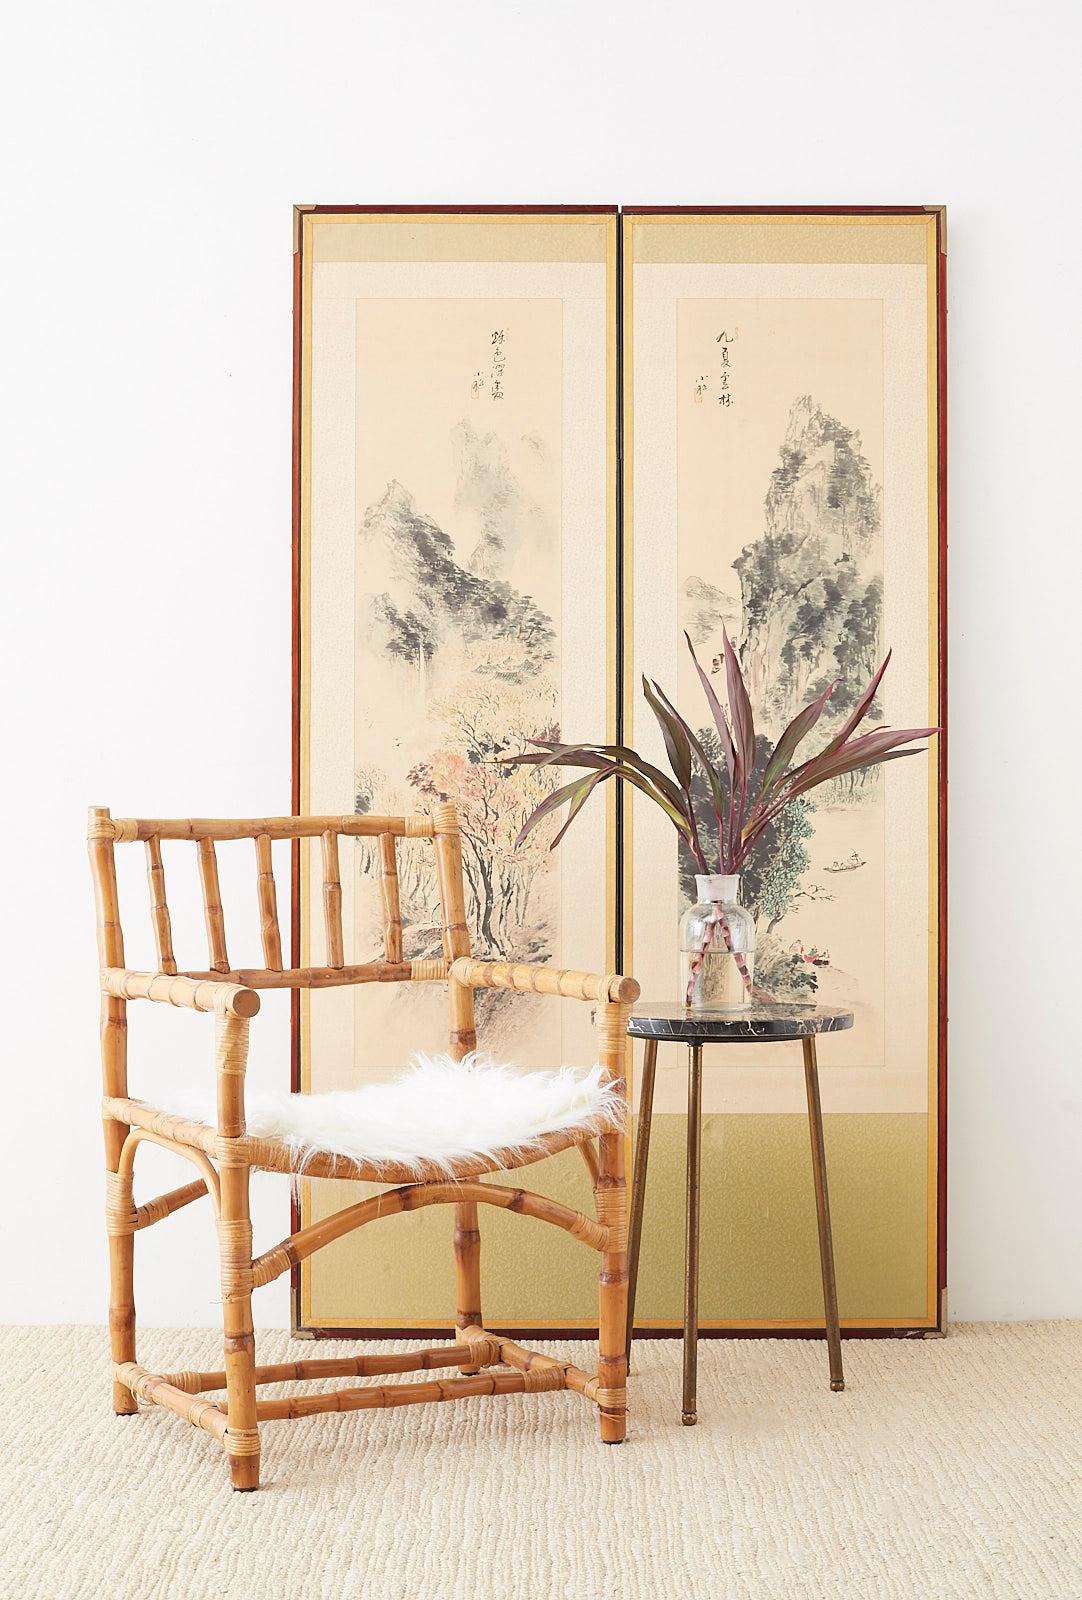 Unique Japanese two-panel screen depicting two painted landscapes of summer and autumn. Ink on color pigments each signed by artist with seals. Mounted to lacquered frames with silk borders. Paintings on textured paper measure 13 wide by 48 inches